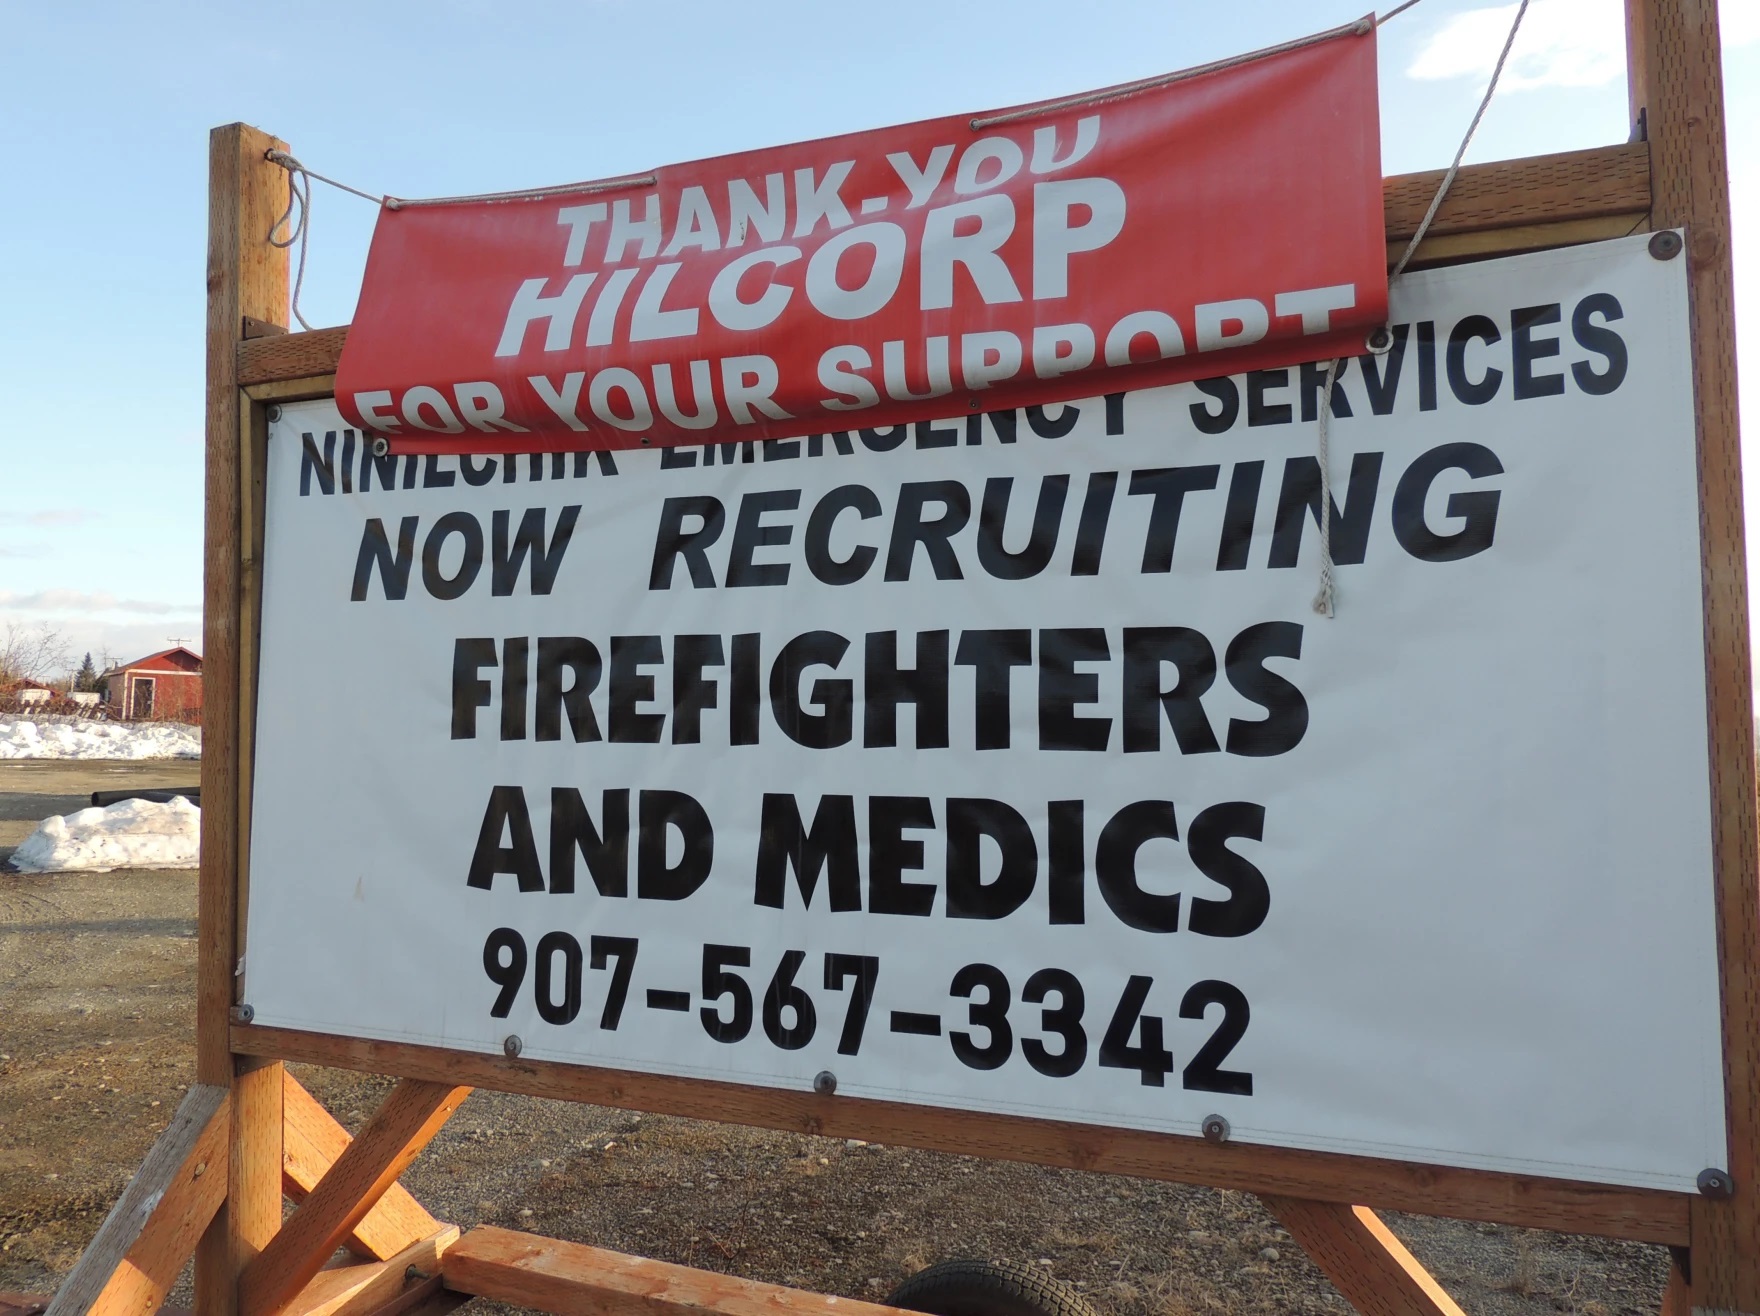 a Hilcorp thank-you sign